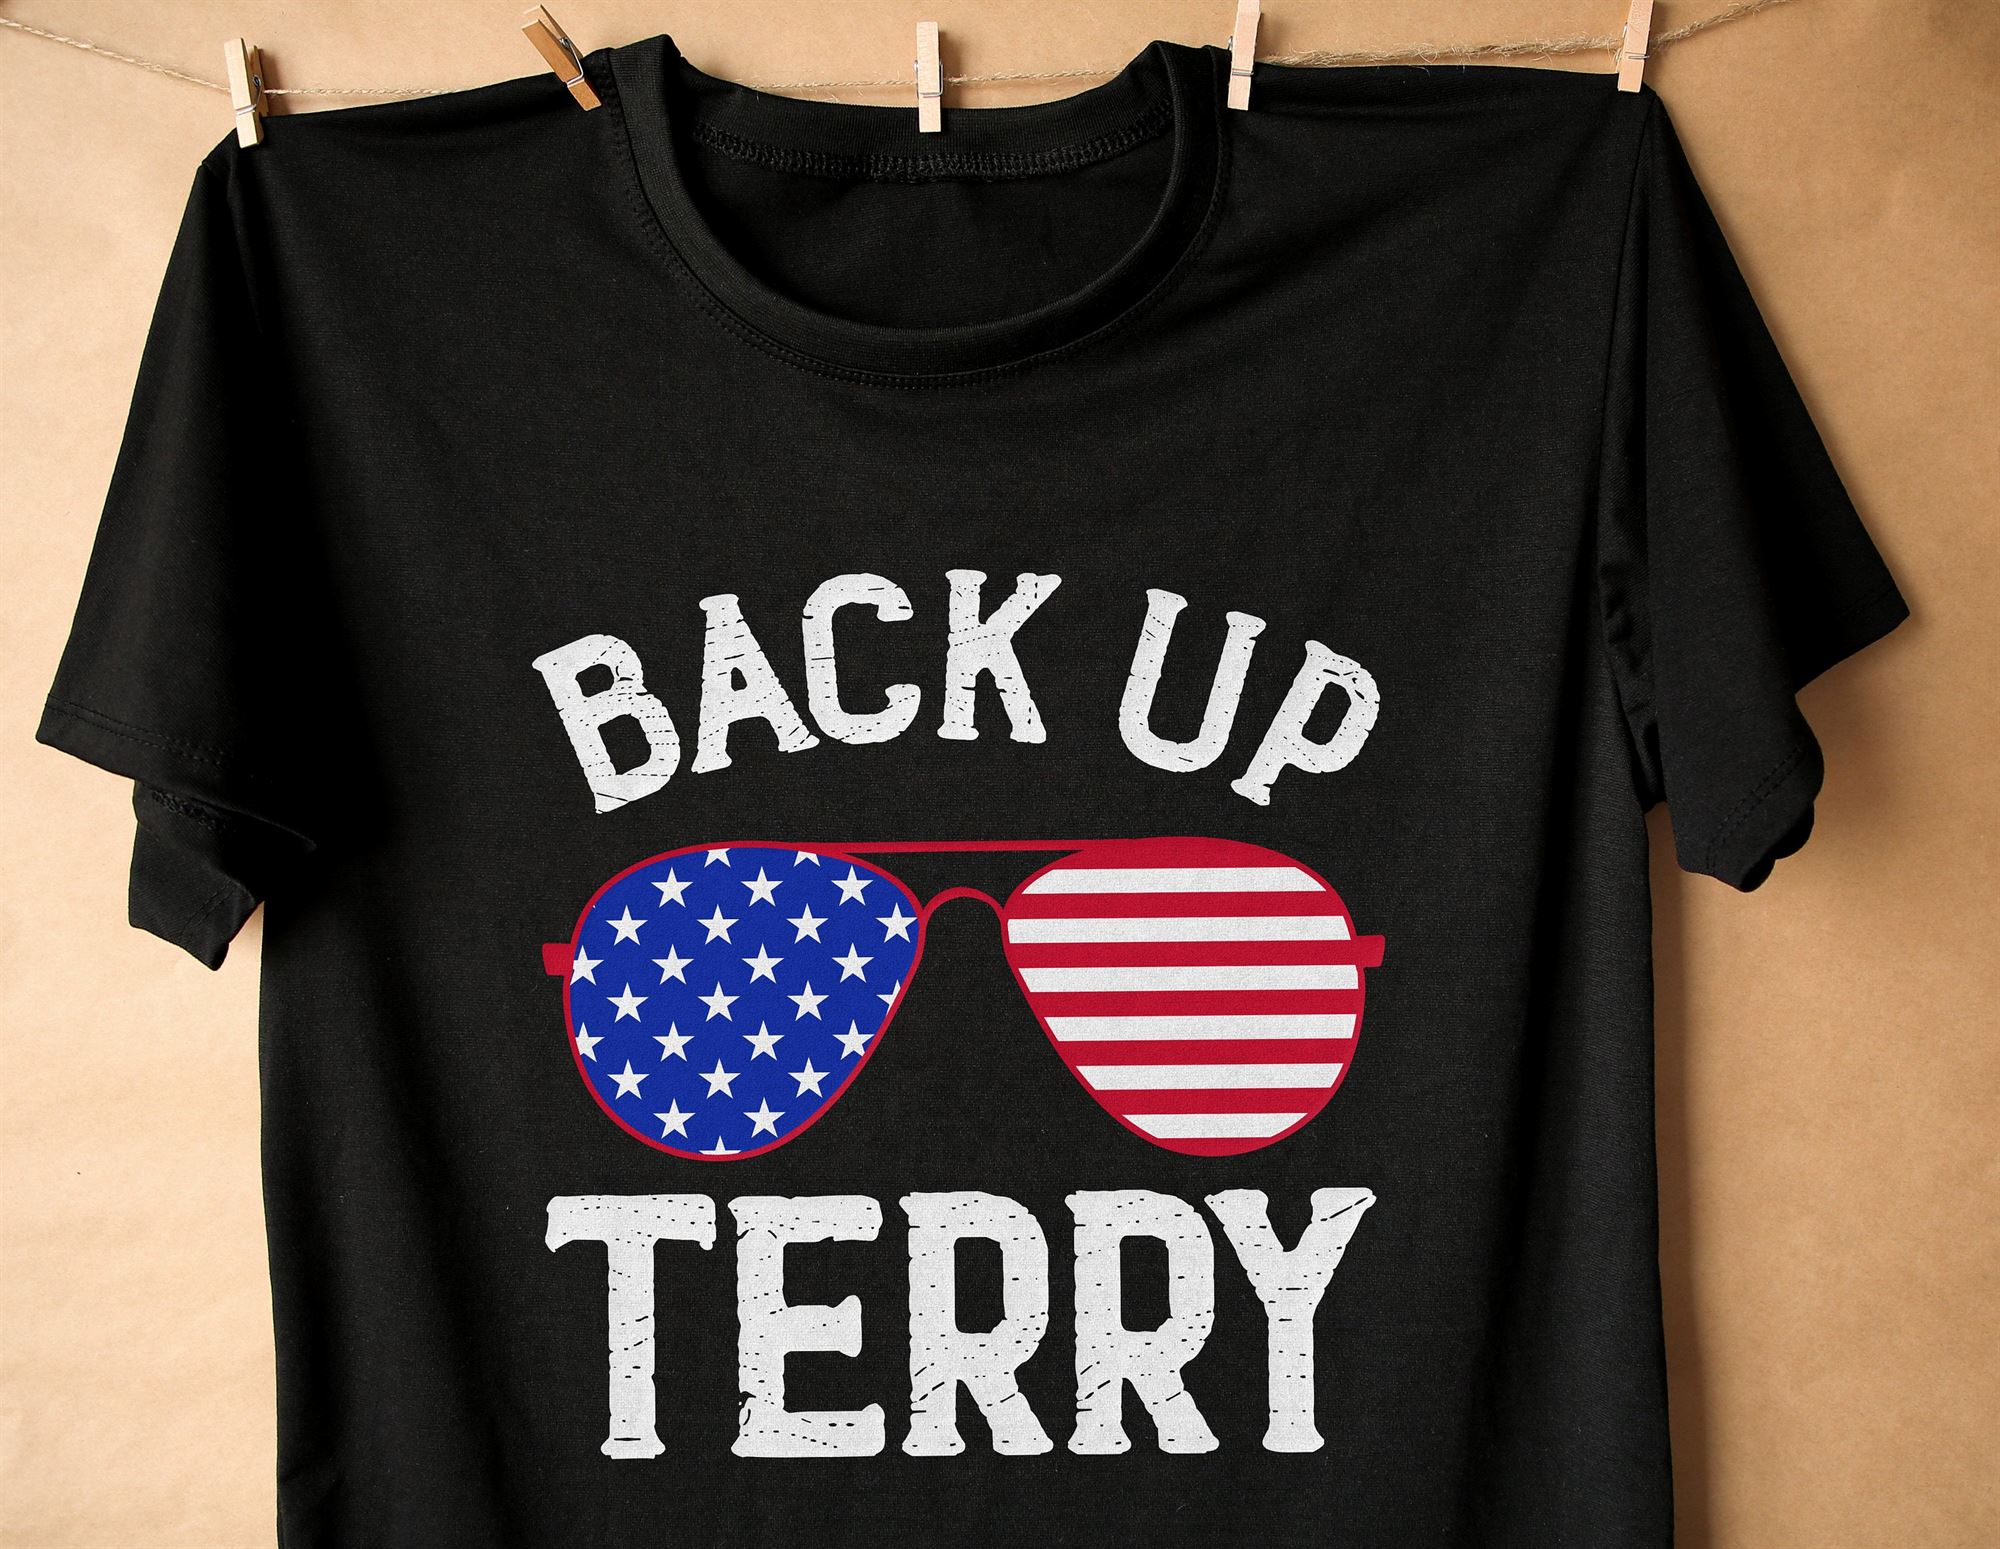 Back It Up Terry Shirtback It Up Terry Put It In Reverse 4th Of July Tshirt Independence Day Shirt